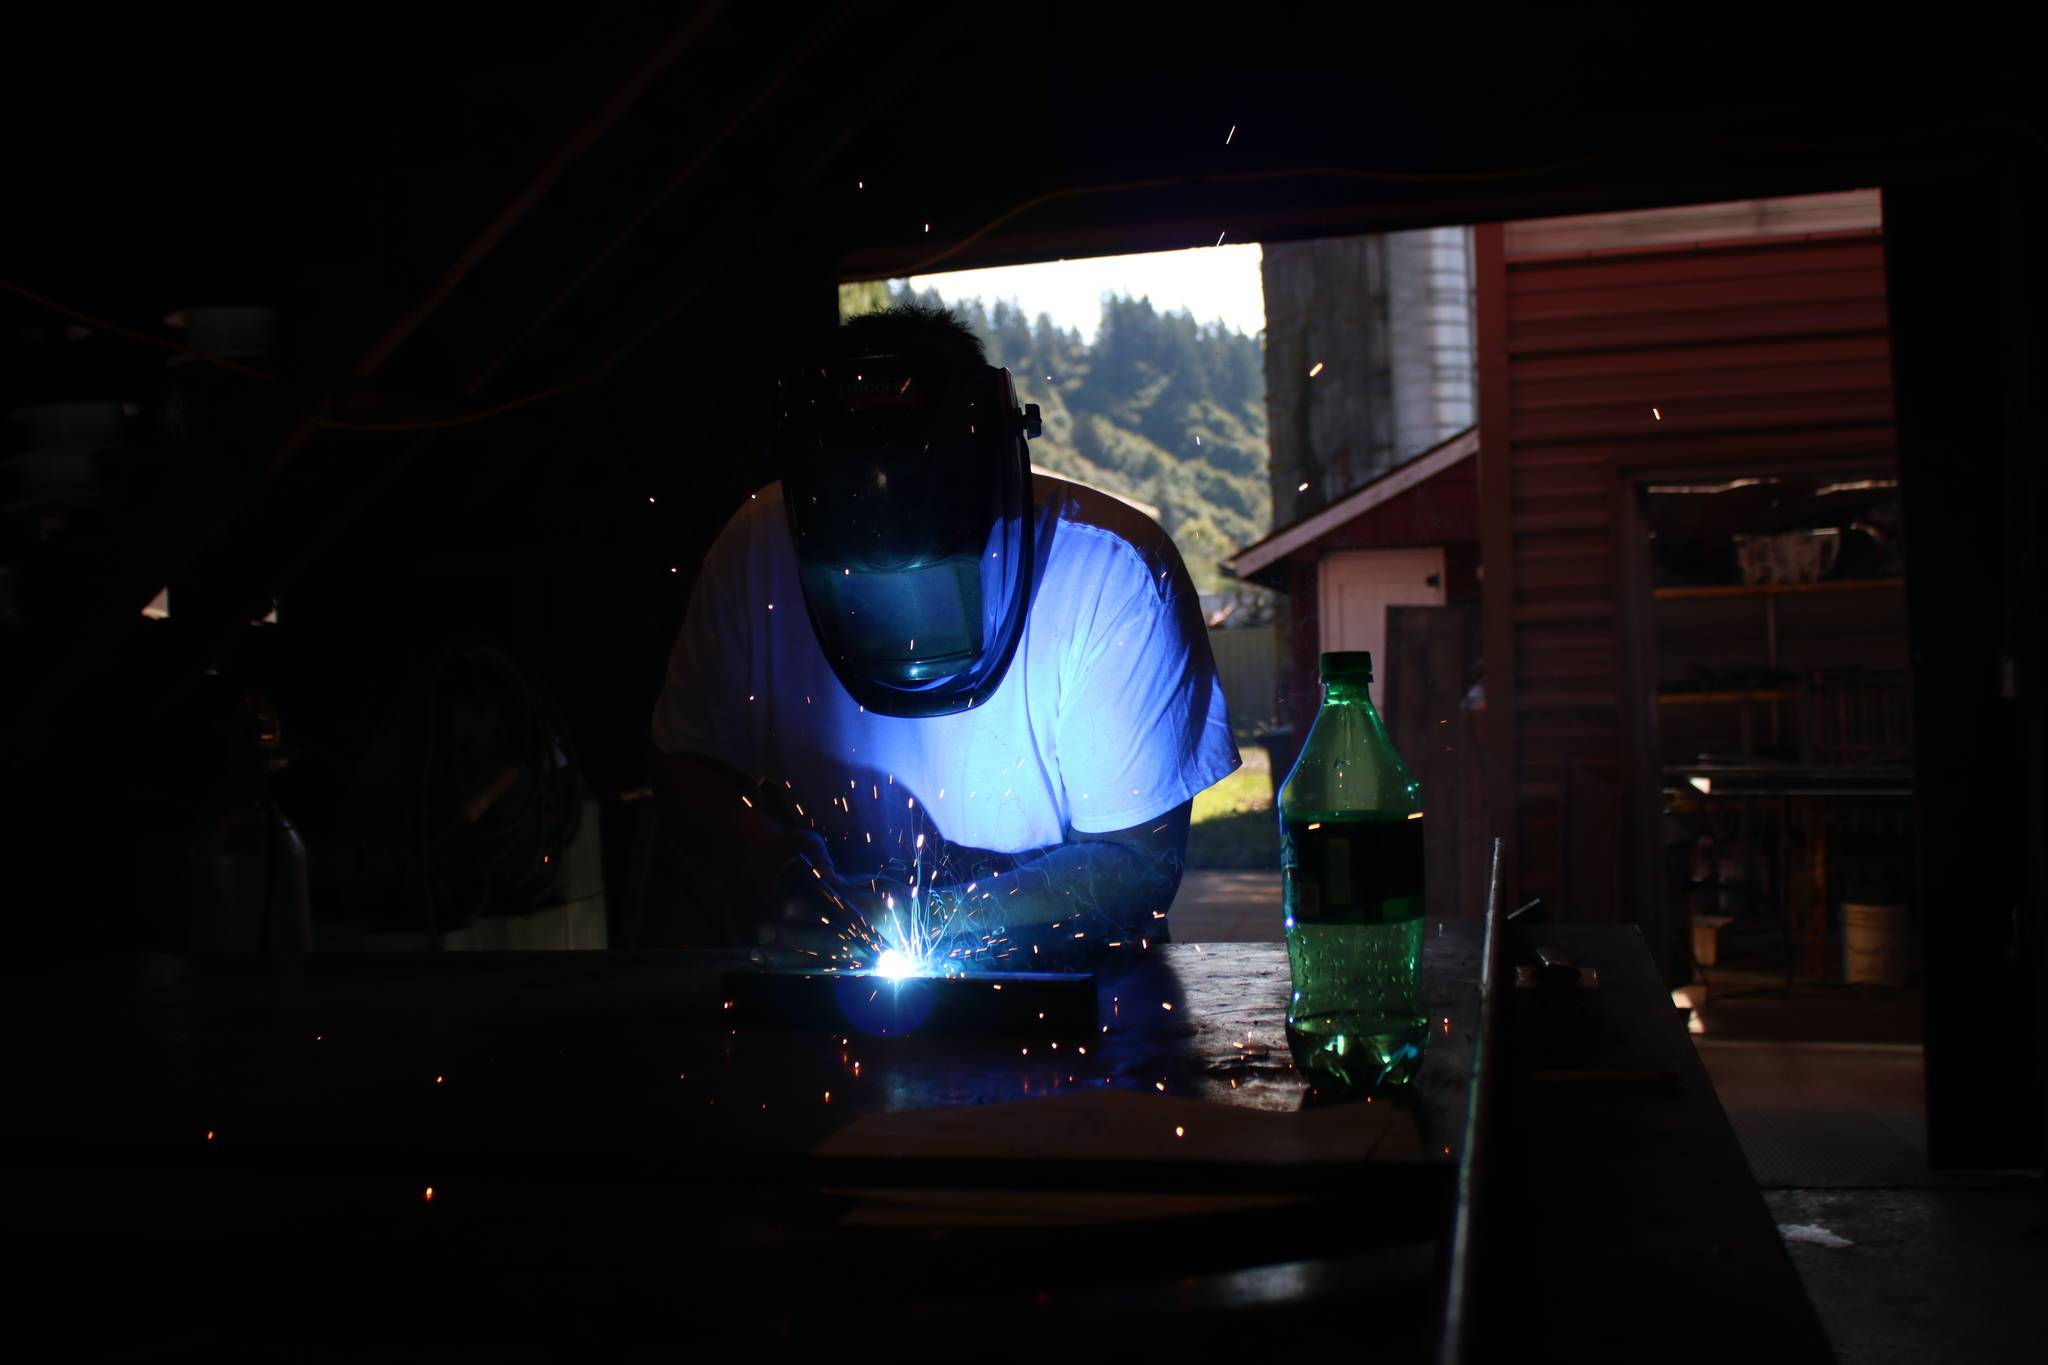 Jim Athan, owner of Ace Iron Works, welds in his shop. Aaron Kunkler/Redmond Reporter